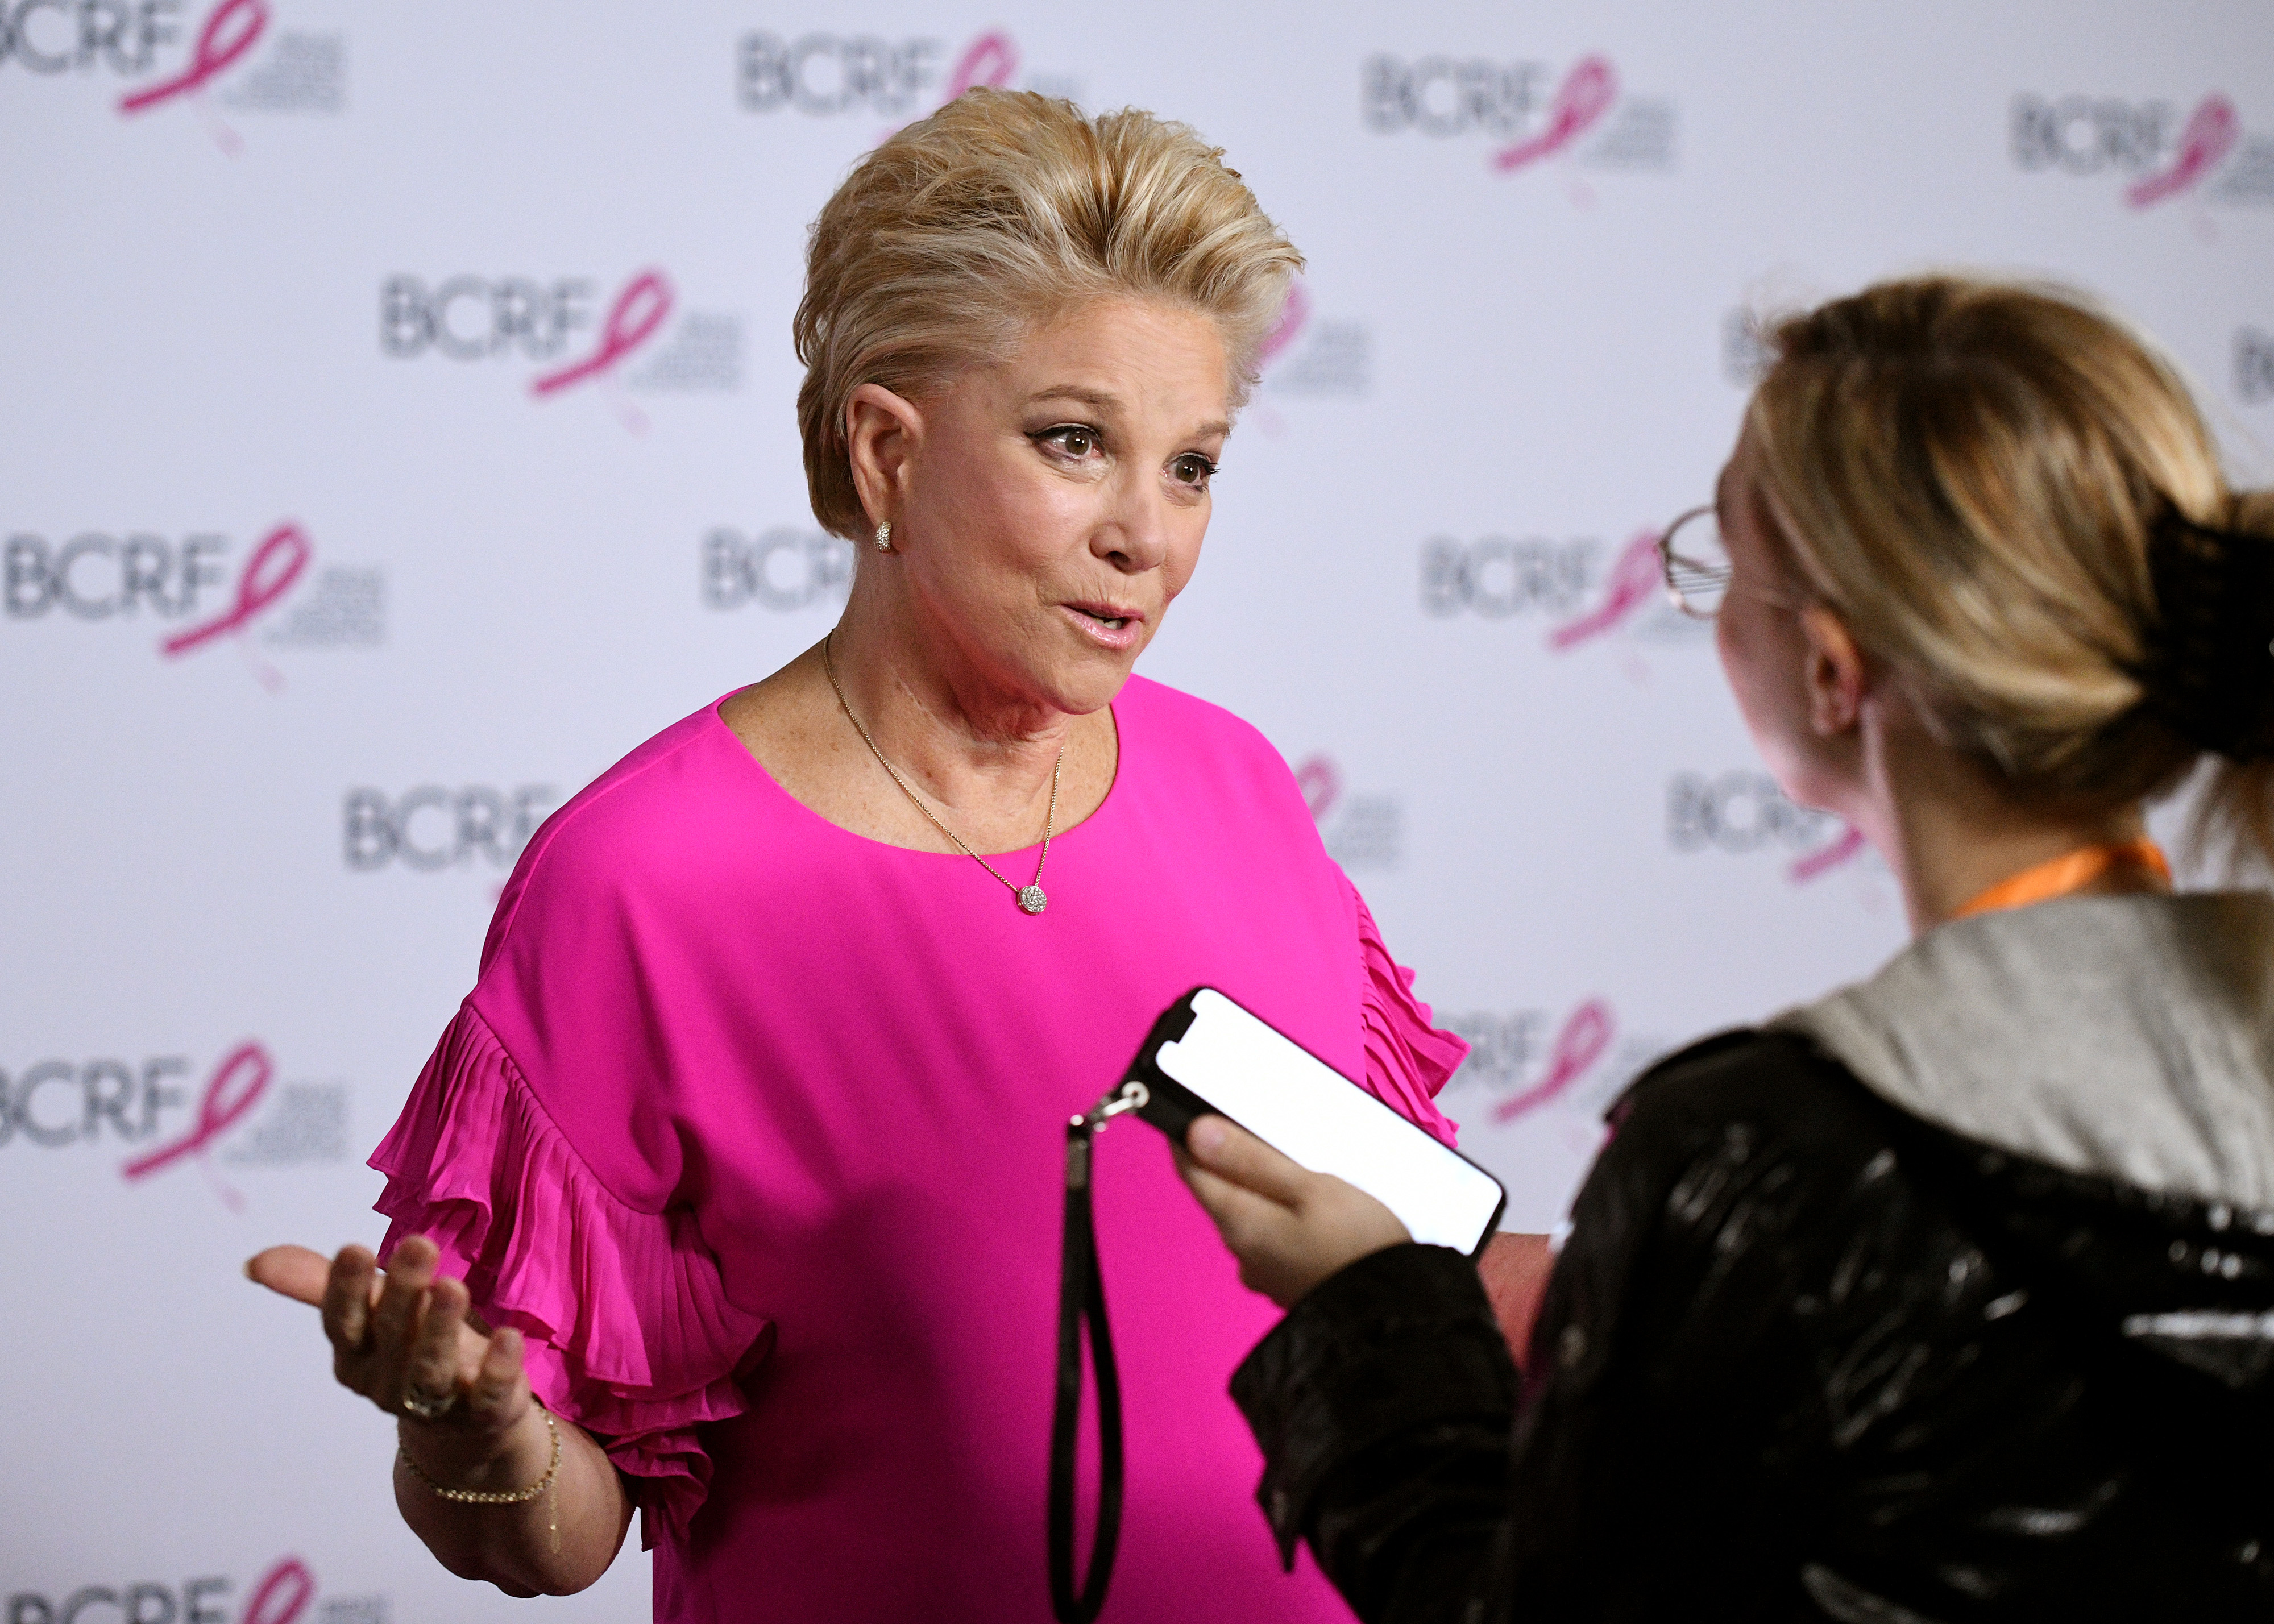 Joan Lunden at the Breast Cancer Research Foundation (BCRF) New York symposium & awards luncheon on October 17, 2019. | Source: Getty Images